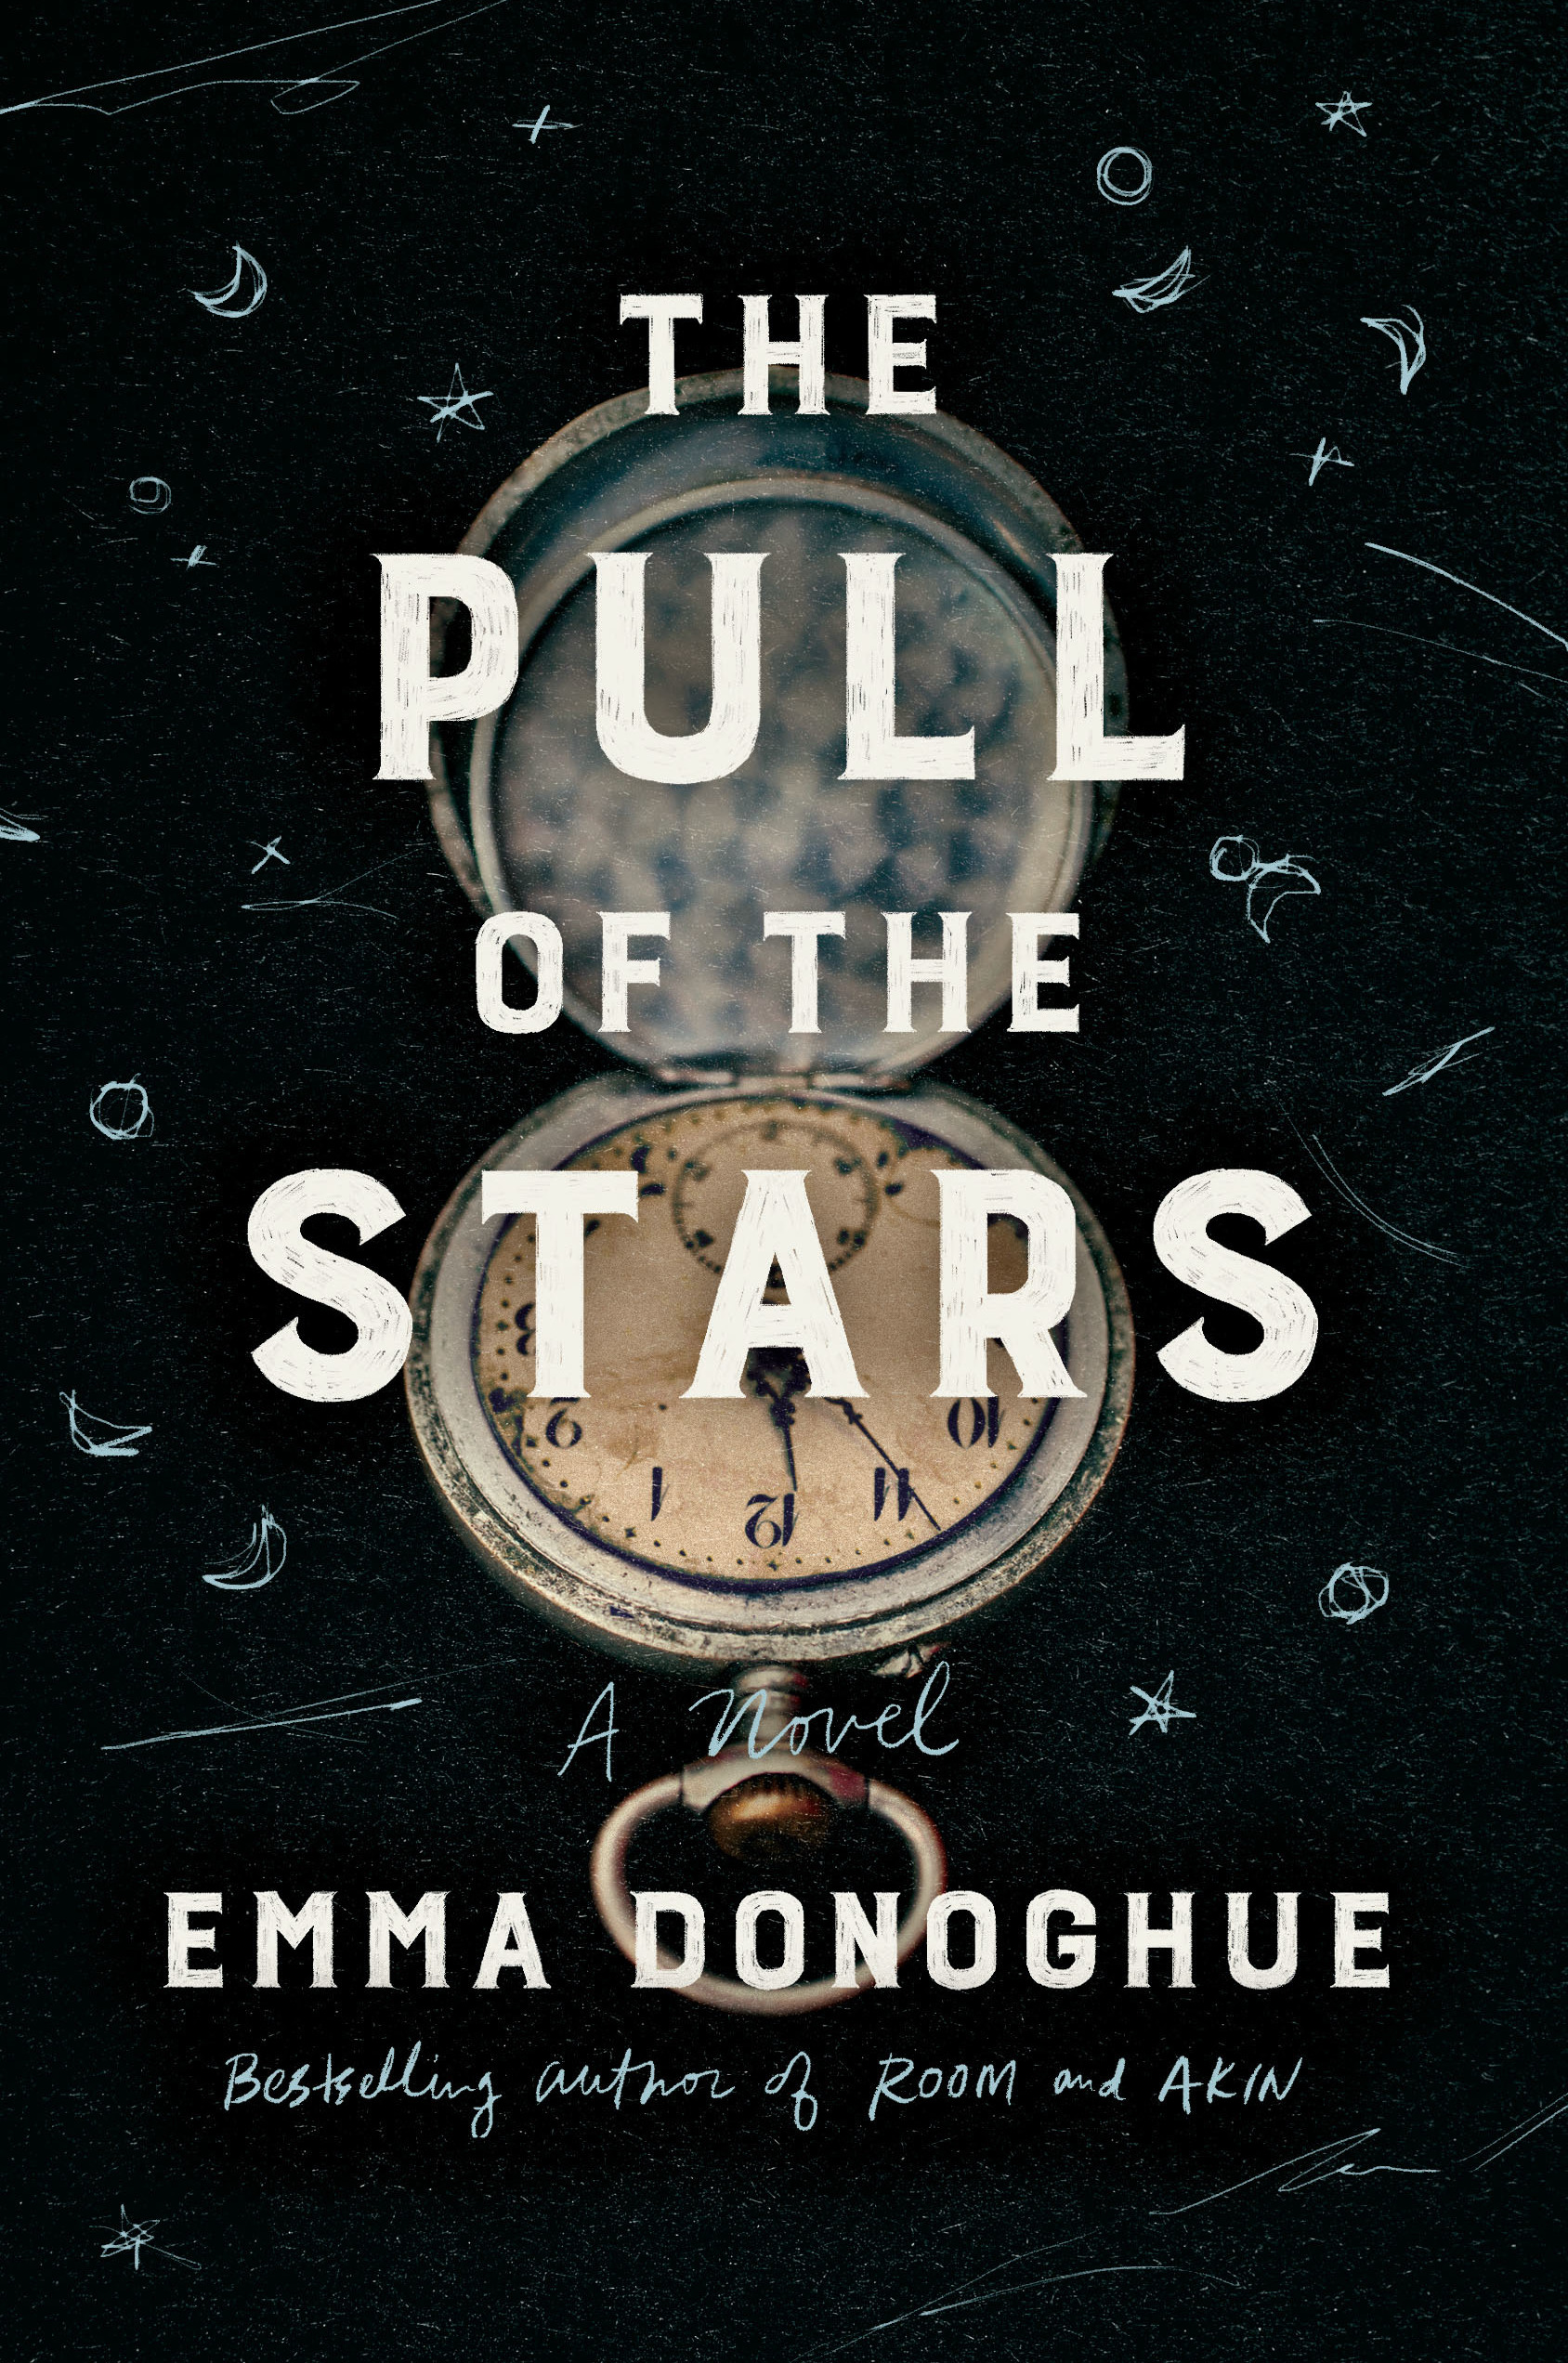 Image for "The Pull of the Stars"